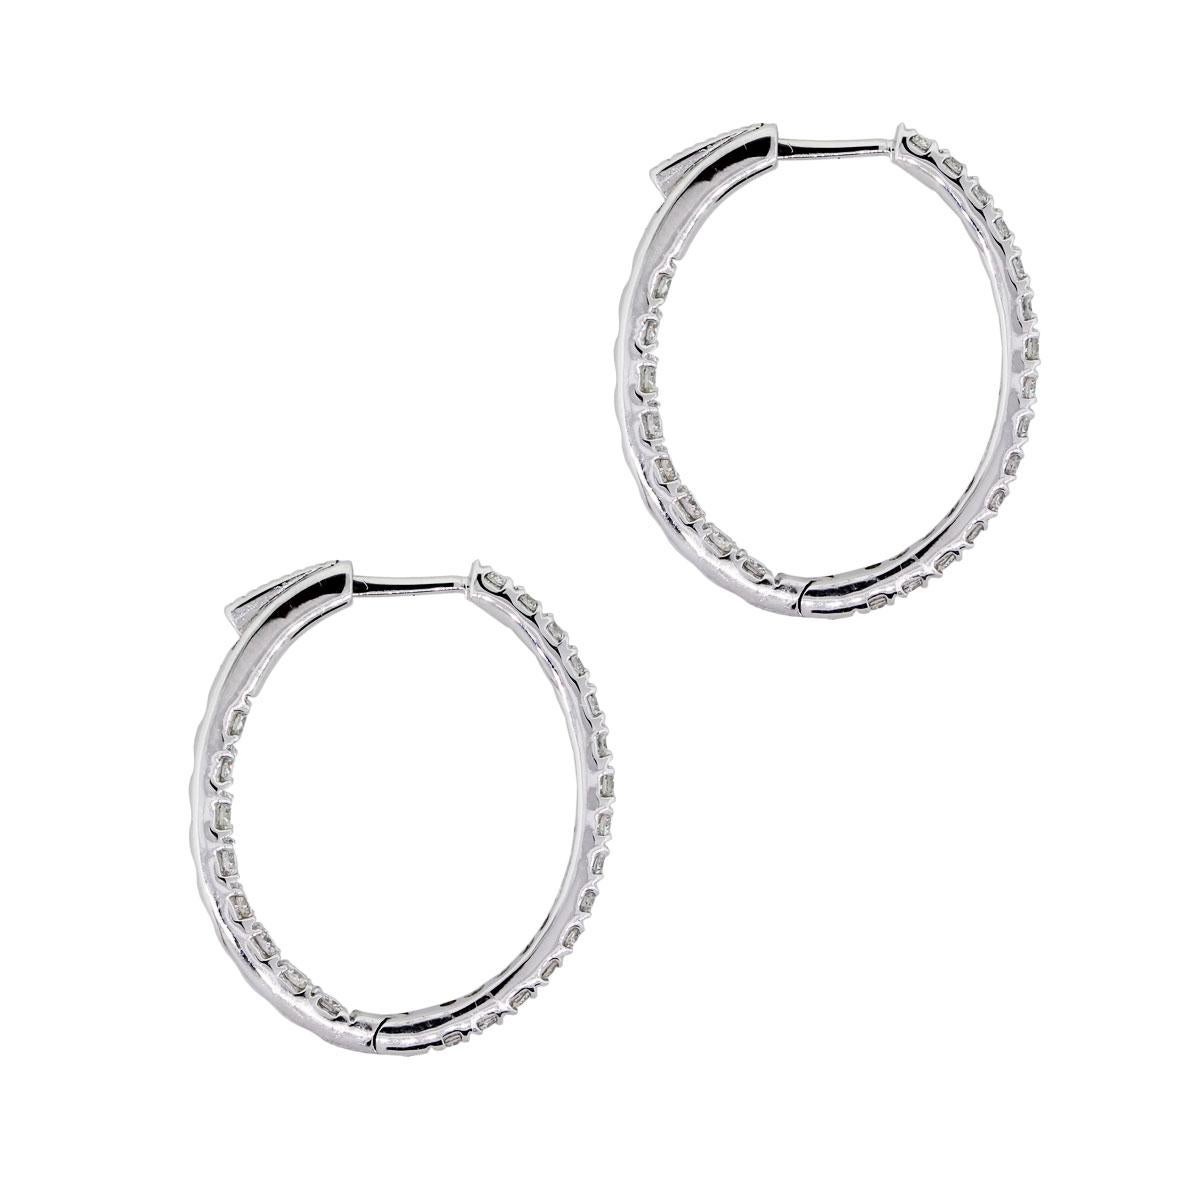 Material: 14k white gold
Diamond Details: Approximately 1ctw of round brilliant diamonds.
Measurements: 1″x 0.09″ x 0.84″
Earrings Backs: Hinged Backs
Total Weight: 5g (3.2dwt)
Additional Details: This item comes with a presentation box!
SKU: